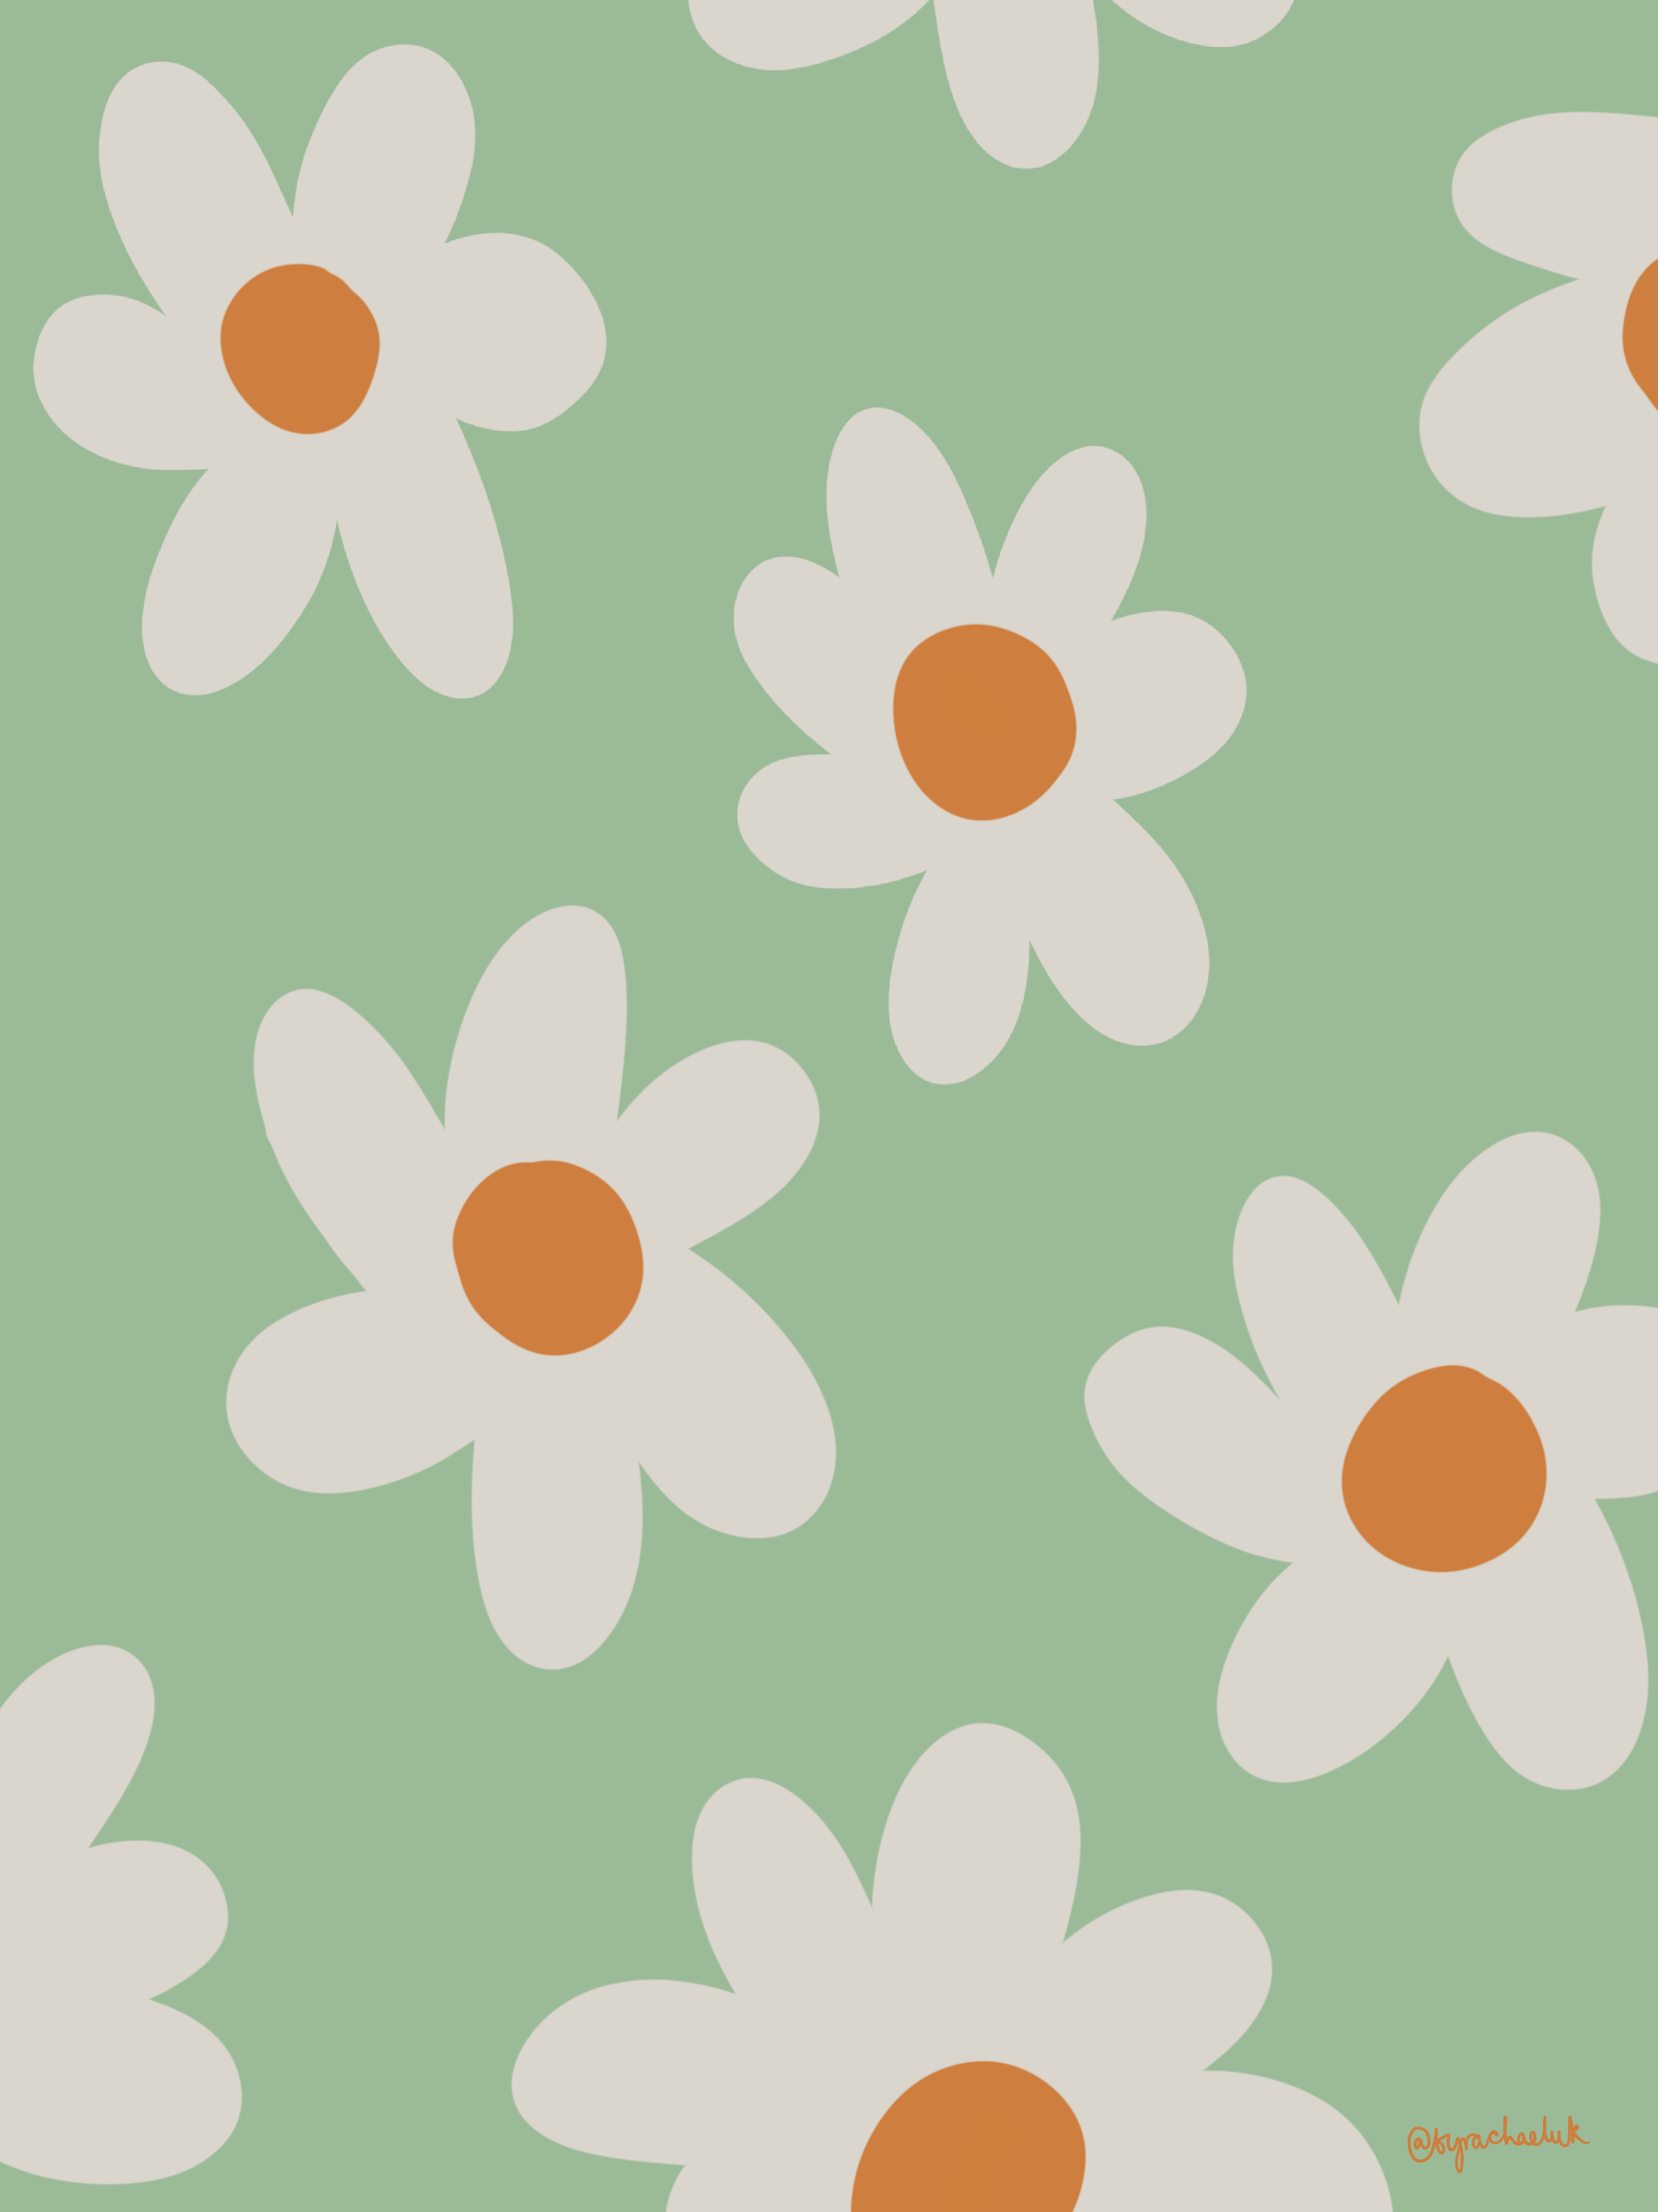 Floral Sage Green Phone Wallpaper. HQ. Cute. Aesthetic. Background. iPhone. Daisy wallpaper, iPhone background, Wallpaper